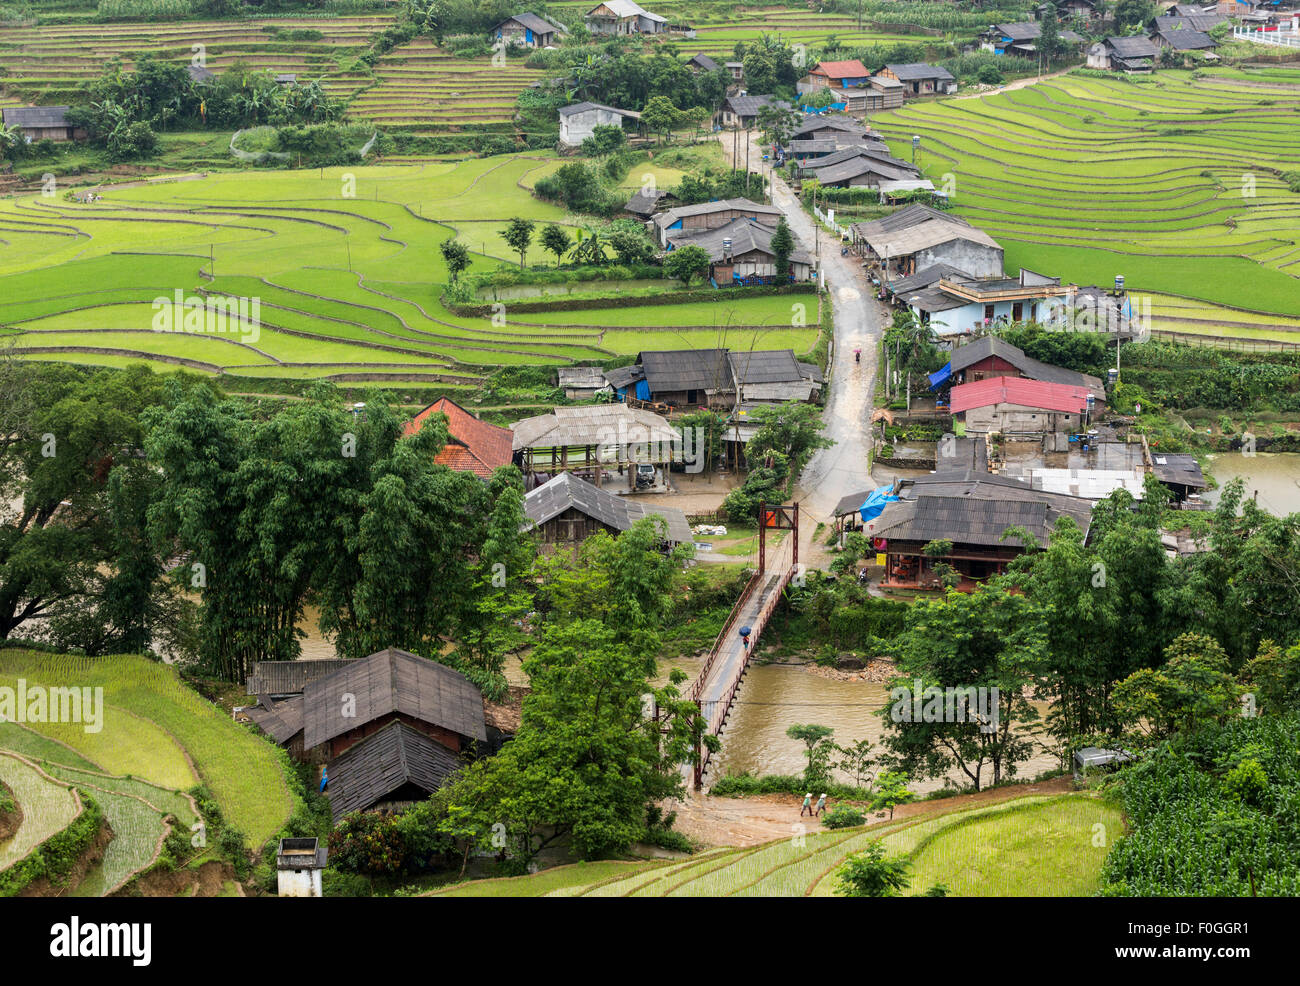 Main street of riverside rural northern Vietnamese village near Sa Pa set among terraced rice paddies and seen from above Stock Photo